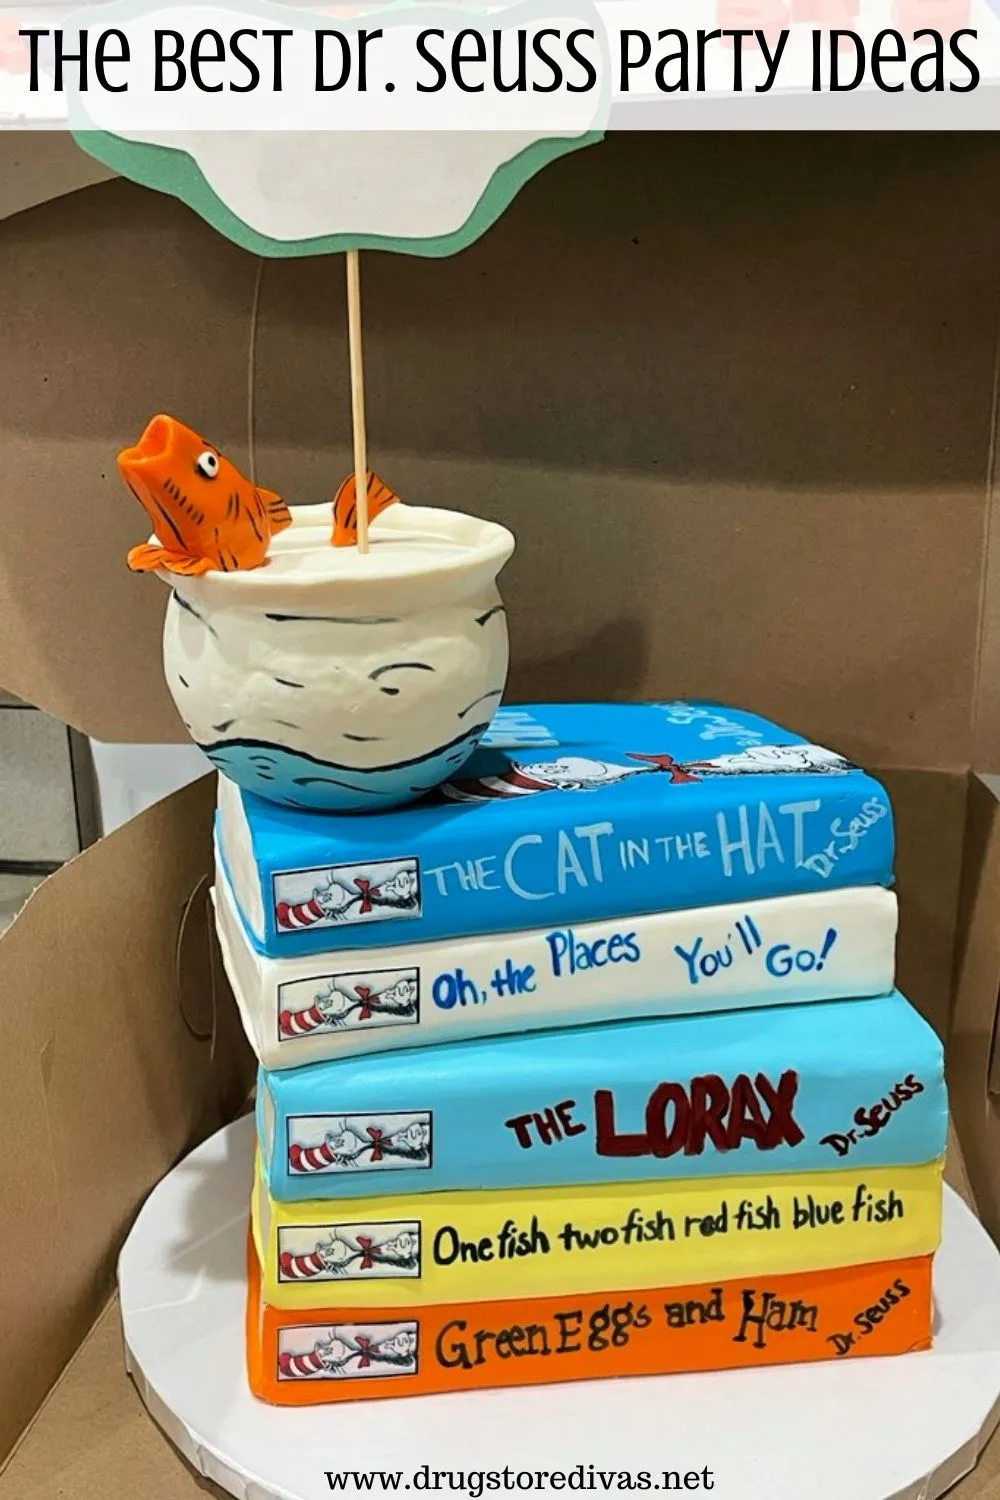 A Dr. Seuss book cake with the words 